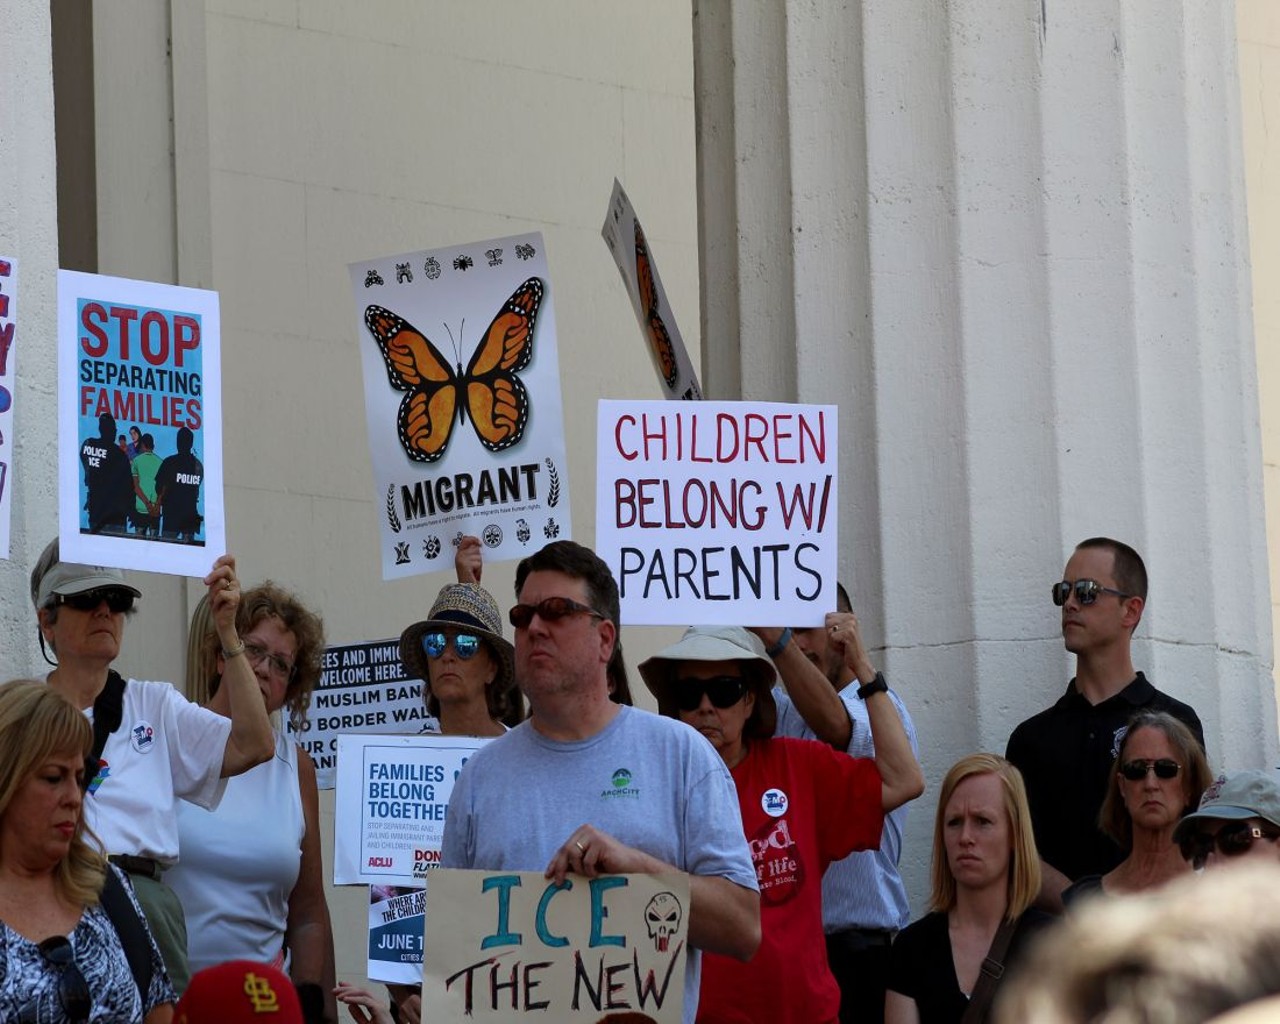 Outraged St. Louis Residents Take to the Streets Against Immigration Policies